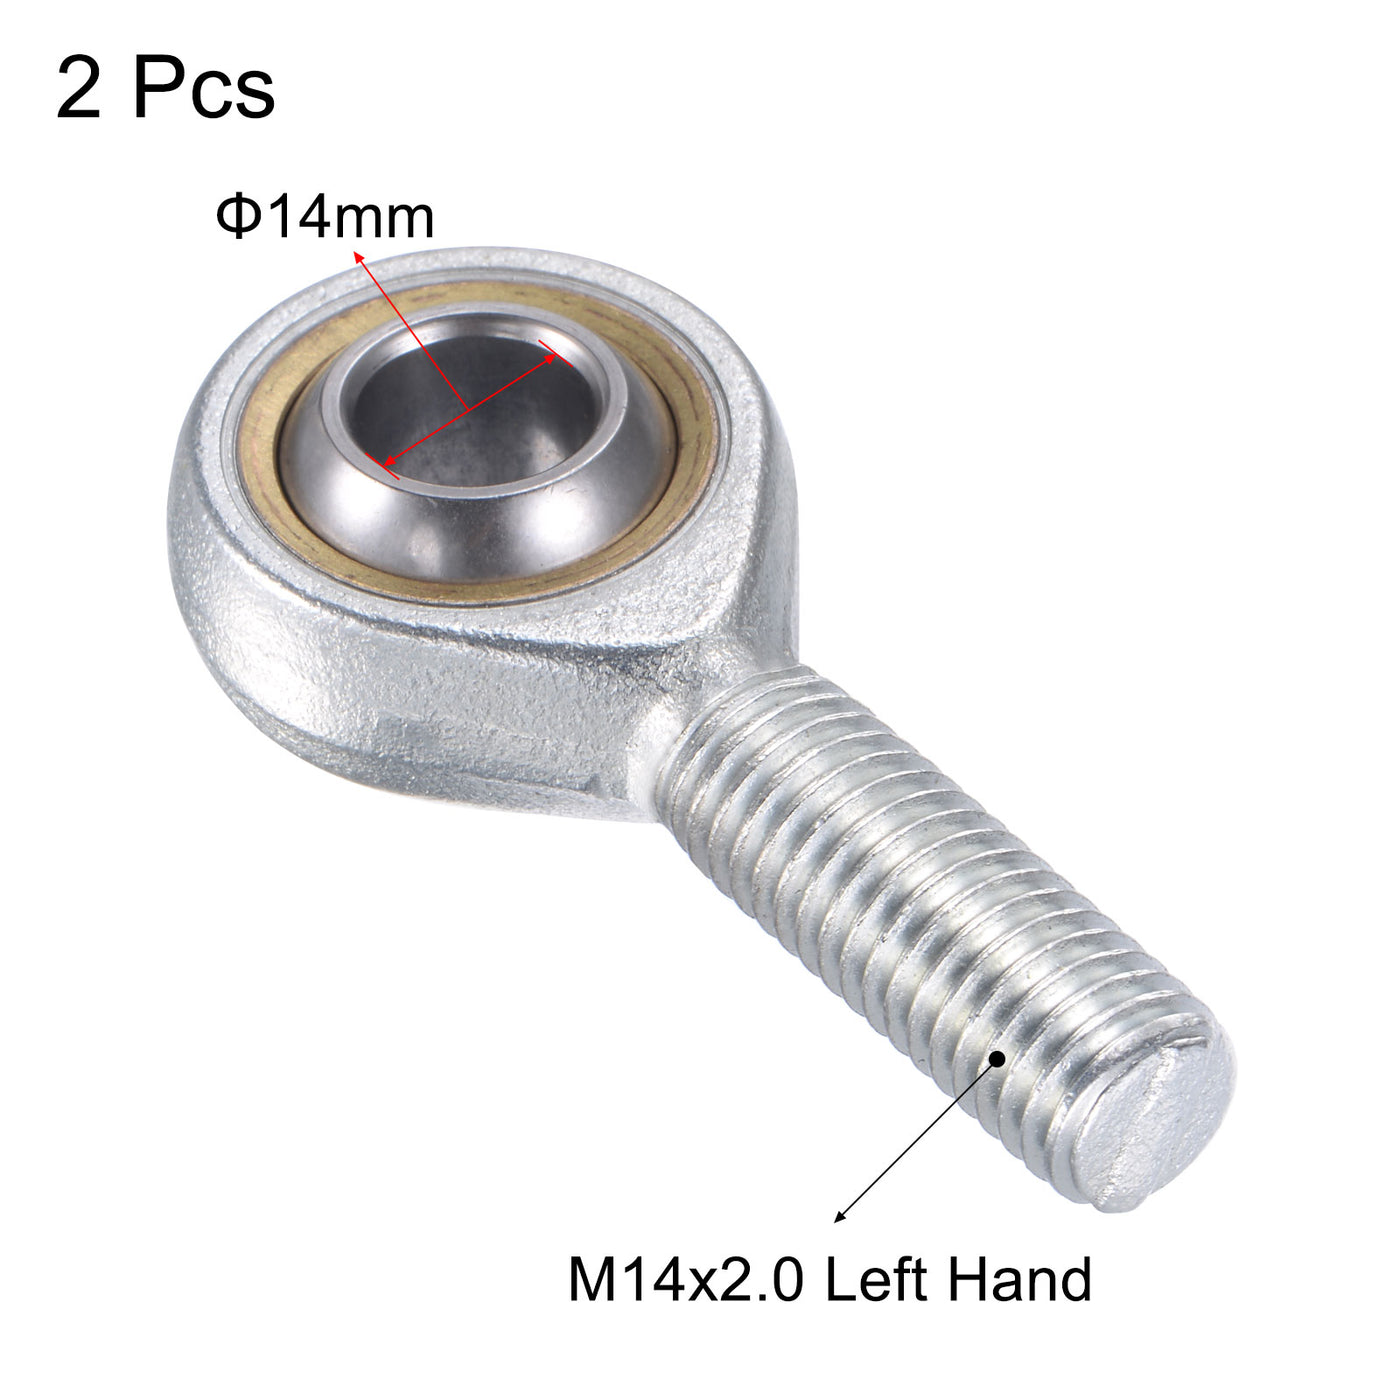 uxcell Uxcell 2pcs SA14TK POSA14 Rod End Bearing 14mm Bore M14x2.0 Left Hand Male Thread